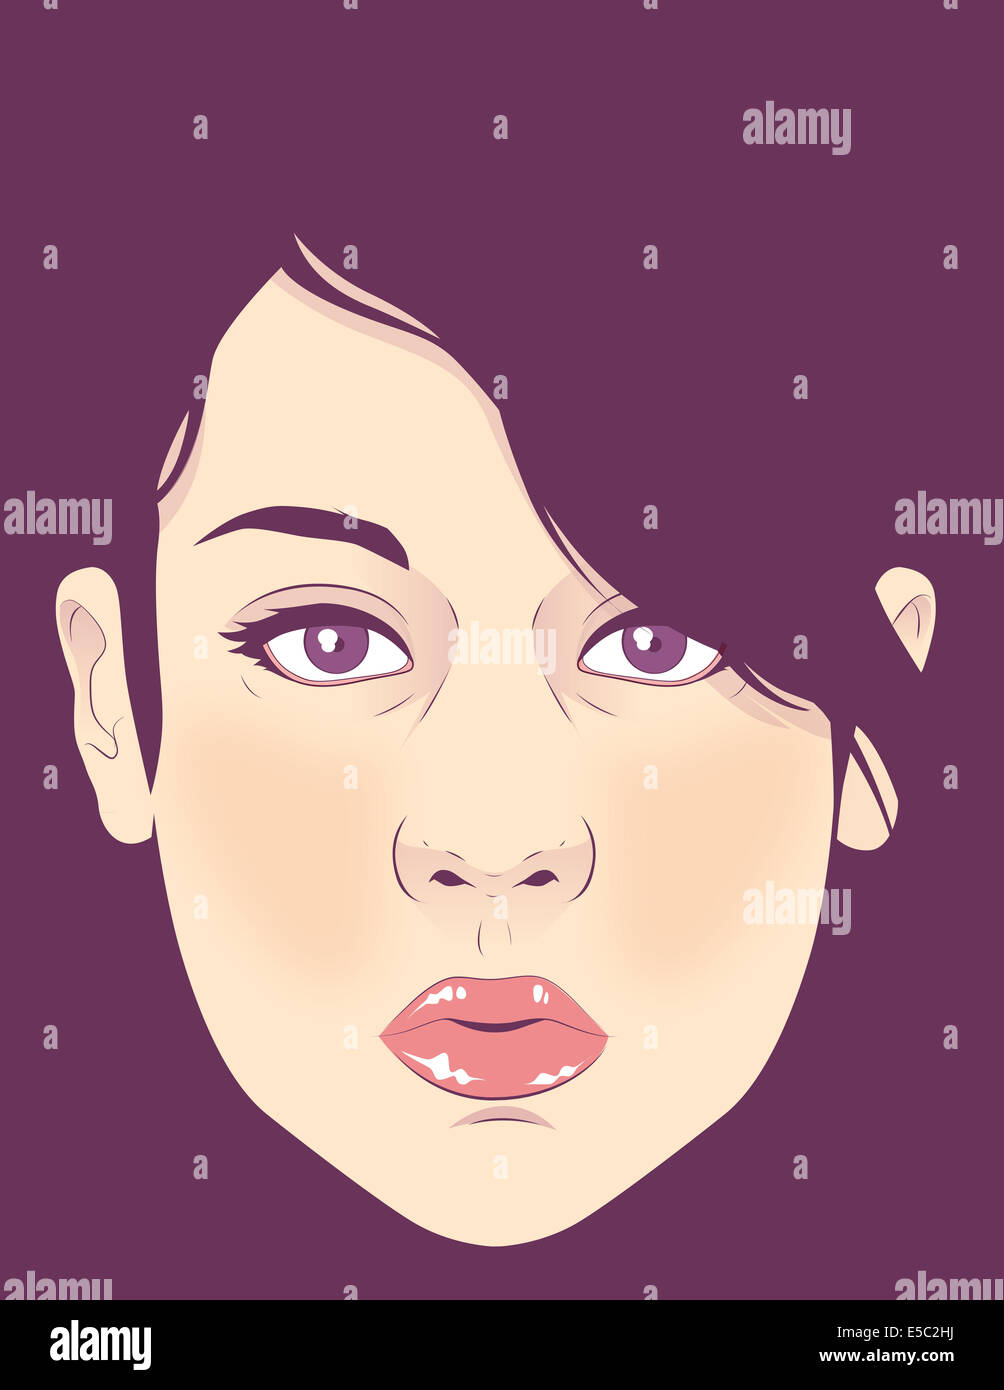 Illustration of trendy woman's face against colored background Stock Photo